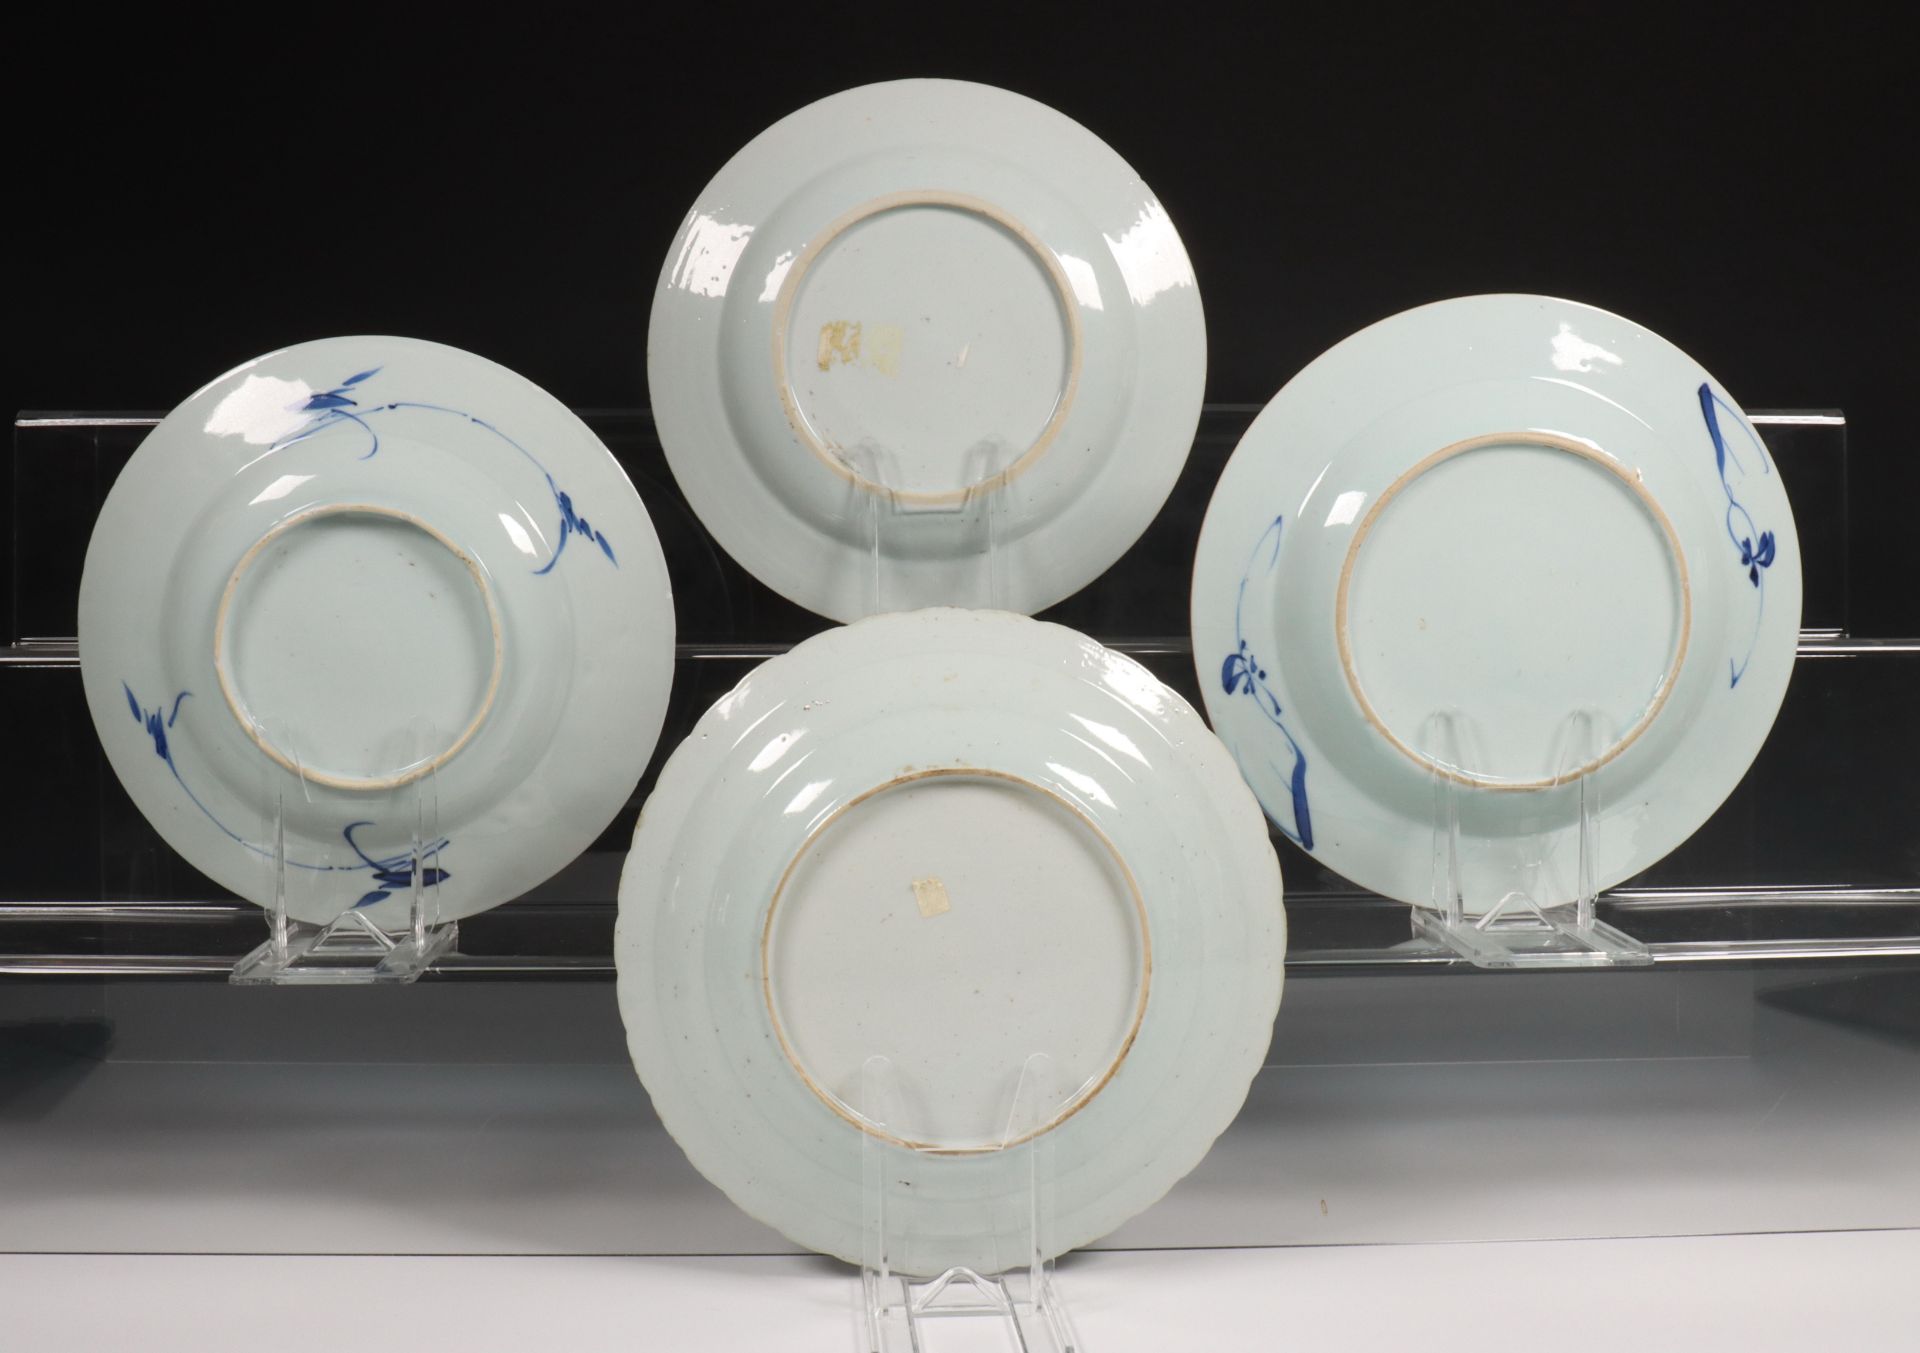 China, four blue and white porcelain plates, Qianlong period (1736-1795), - Image 2 of 2